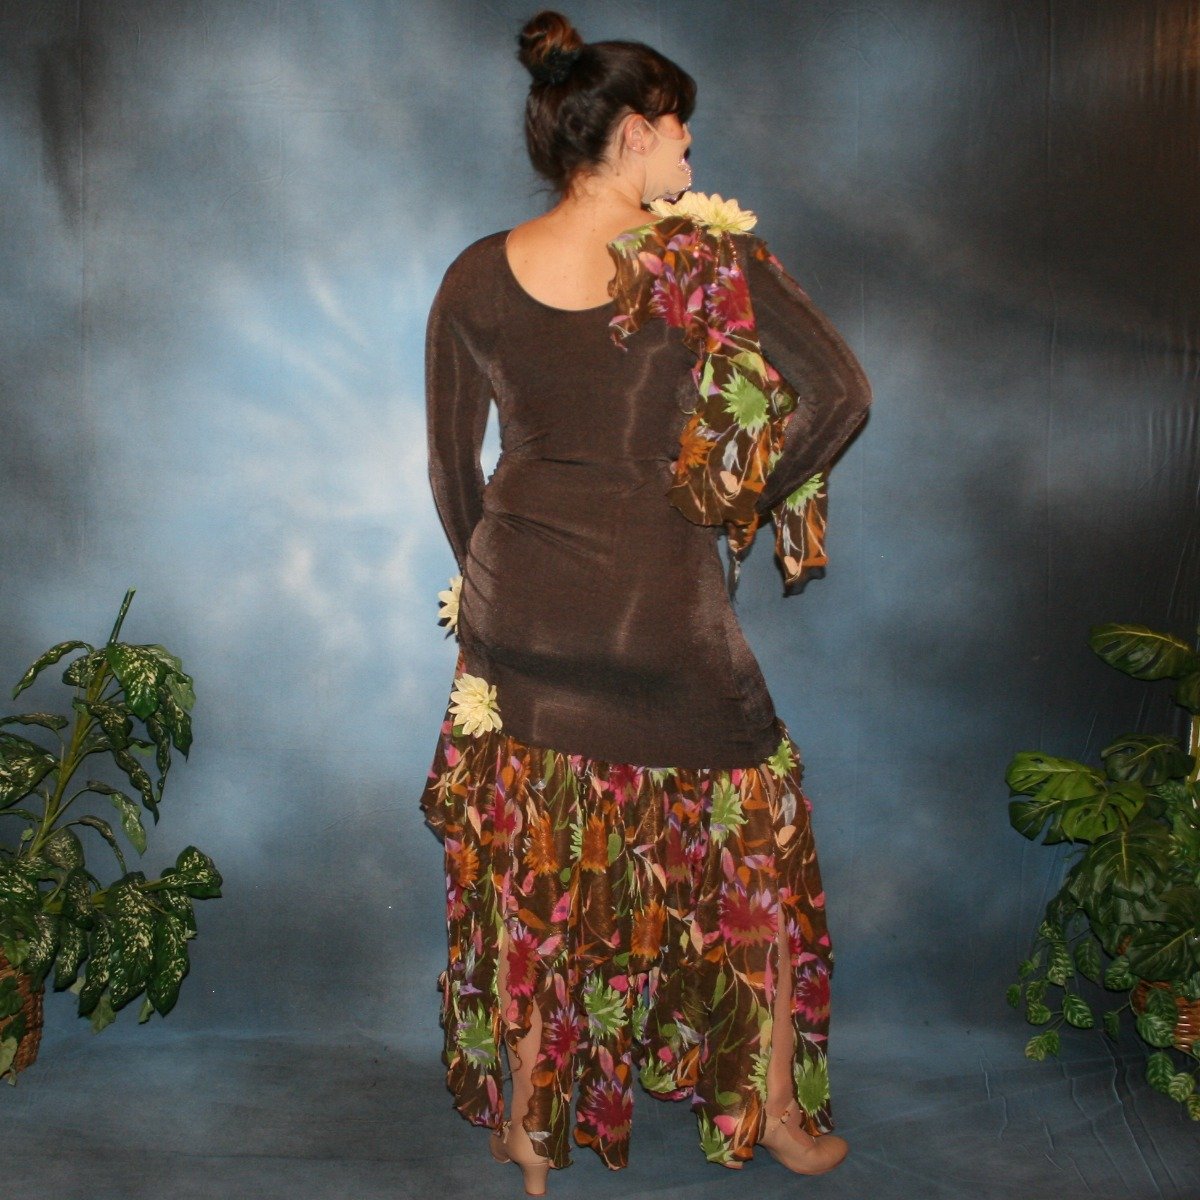 Crystal's Creations back view of brown ballroom dress created in luxurious deep chocolate brown slinky along with fall flowers print chiffon